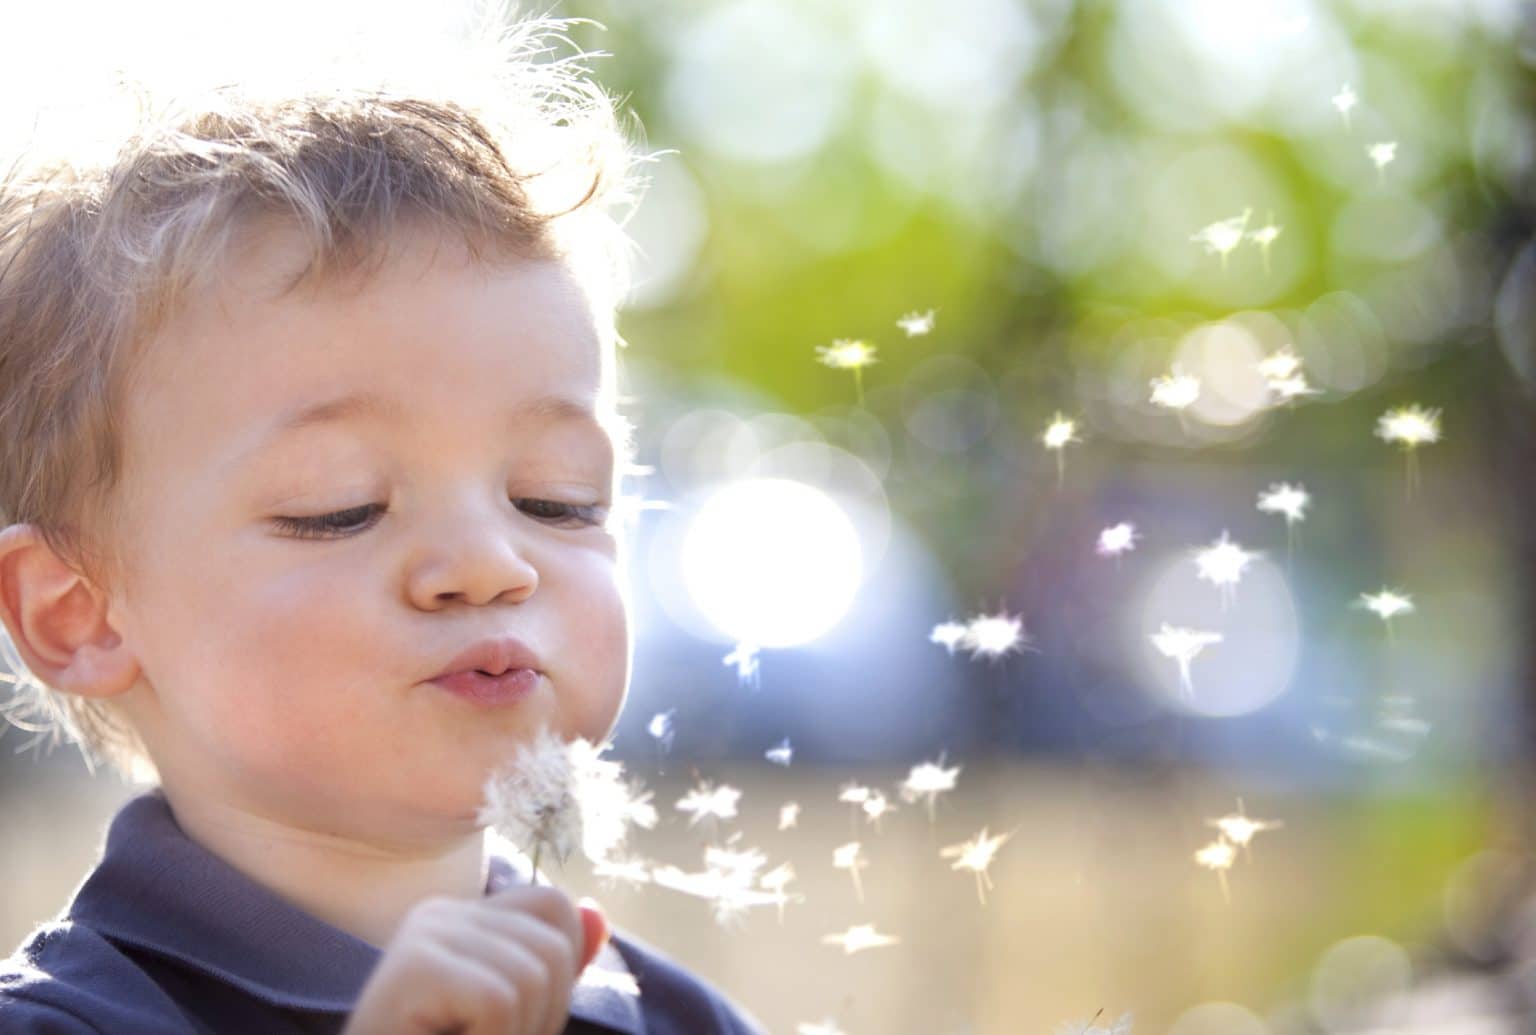 A young child blowing on a dandelion.